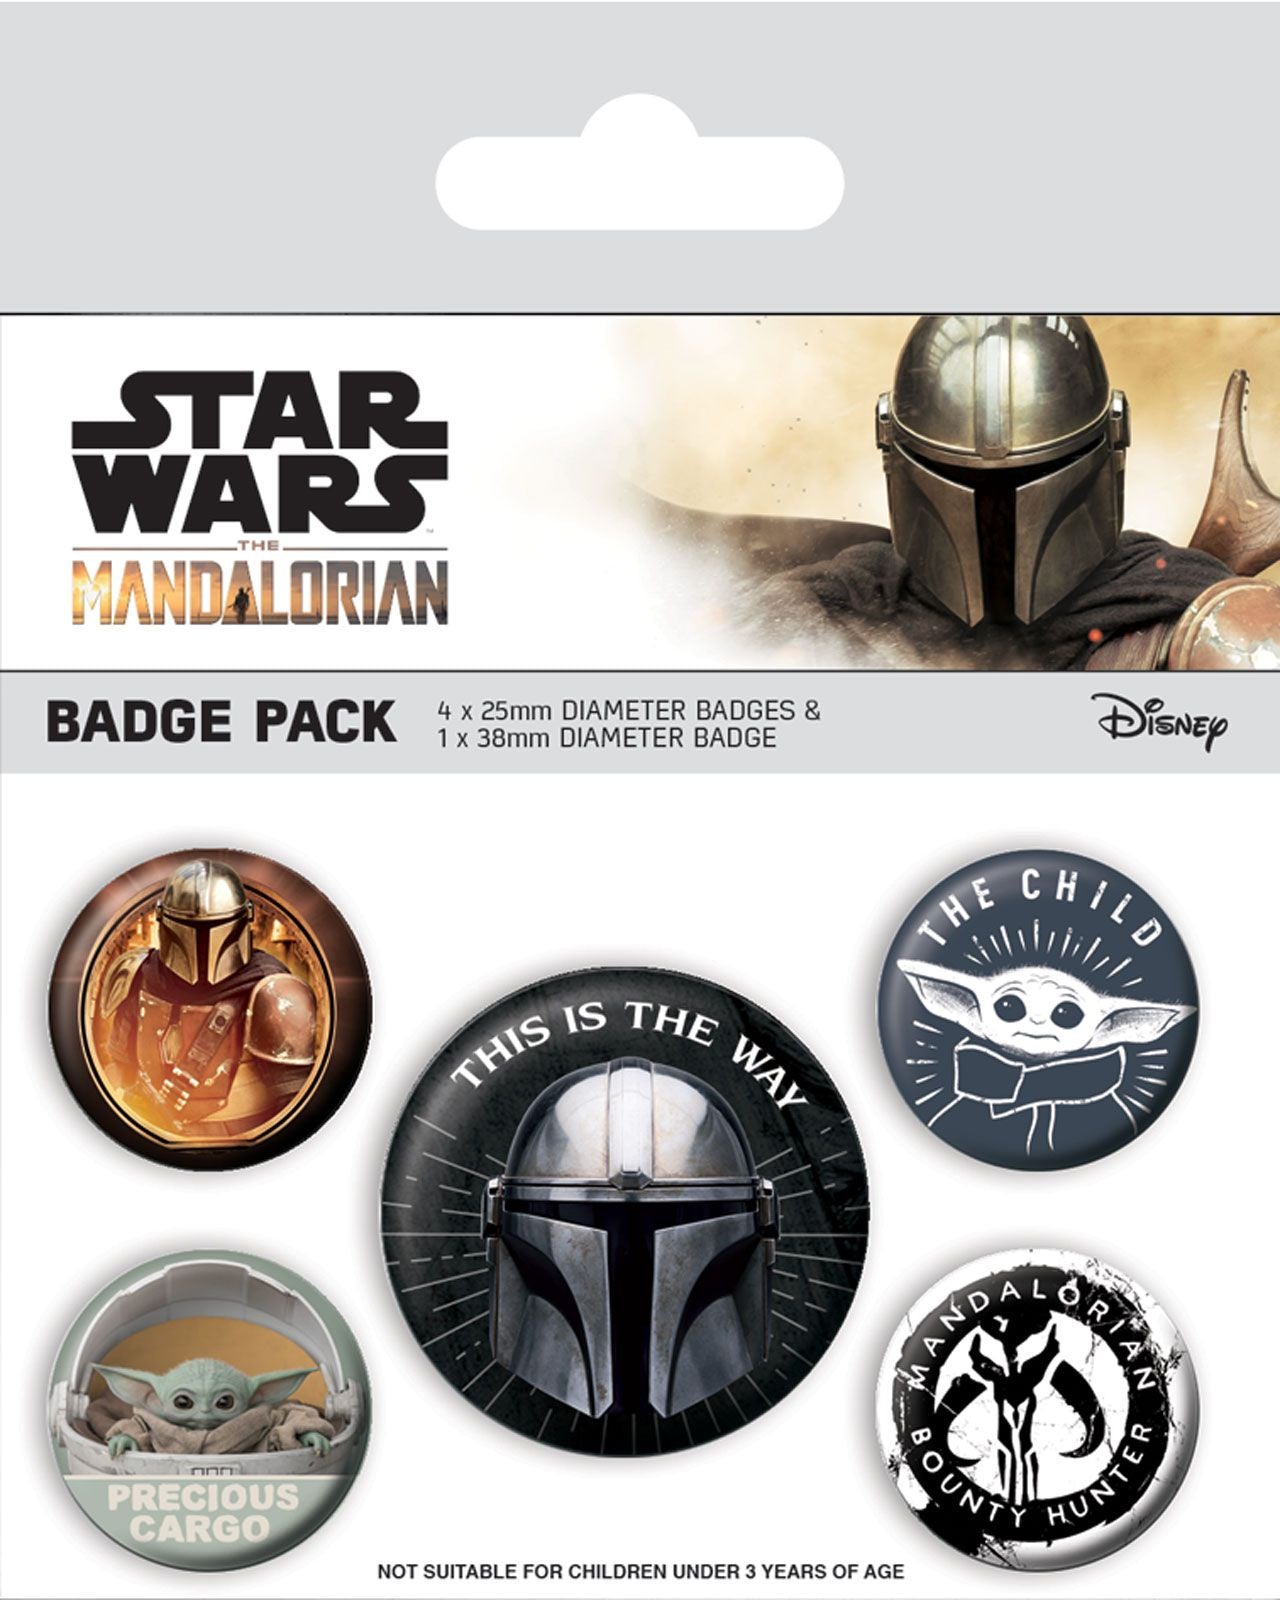 STAR WARS : MANDALORIAN - This is the Way Badge Pack